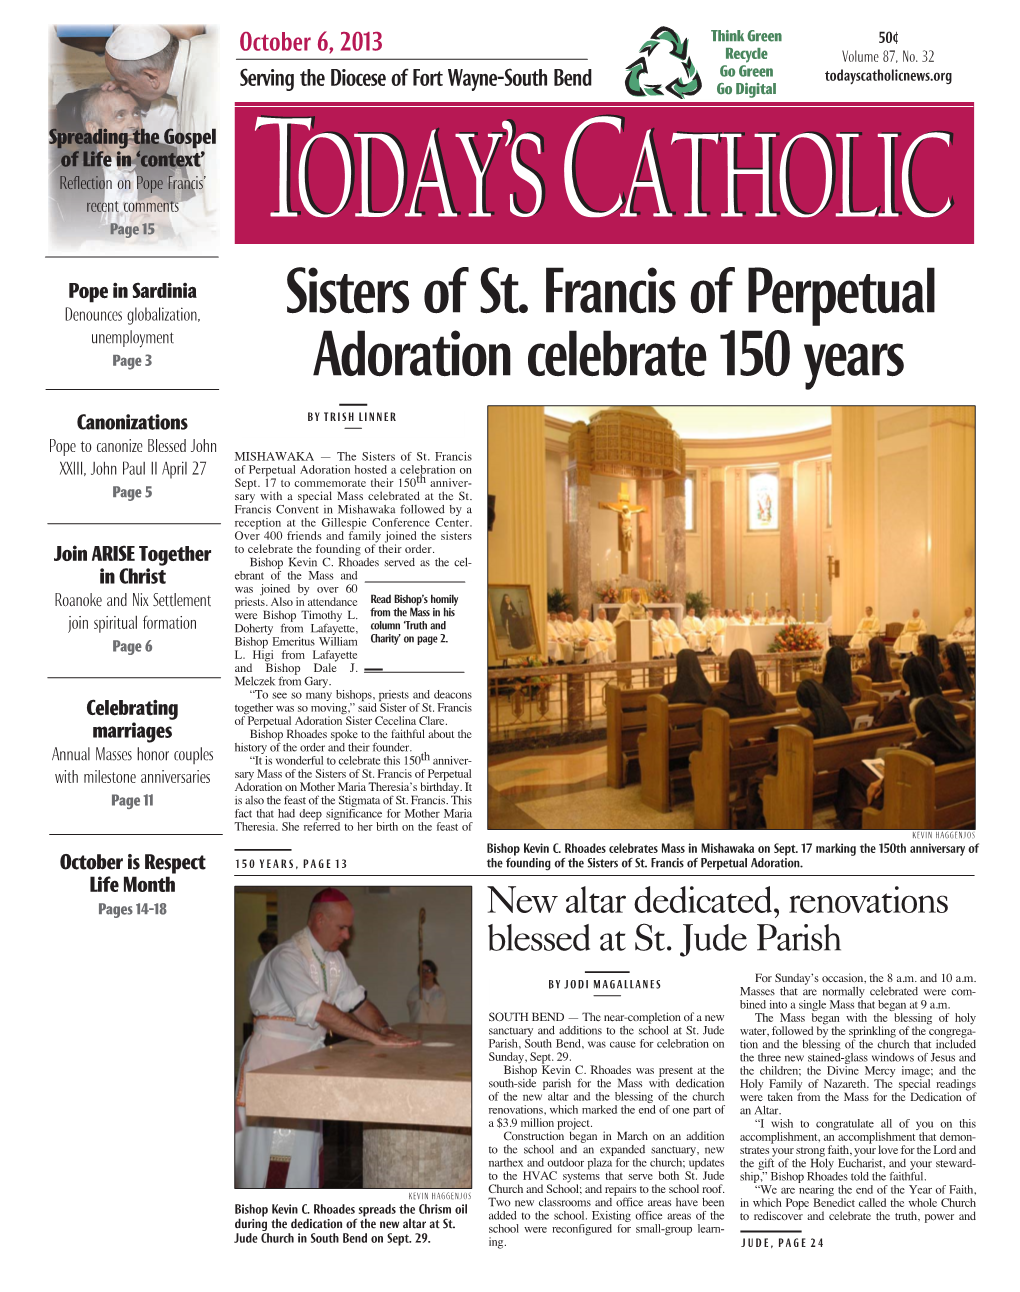 Sisters of St. Francis of Perpetual Adoration Celebrate 150 Years